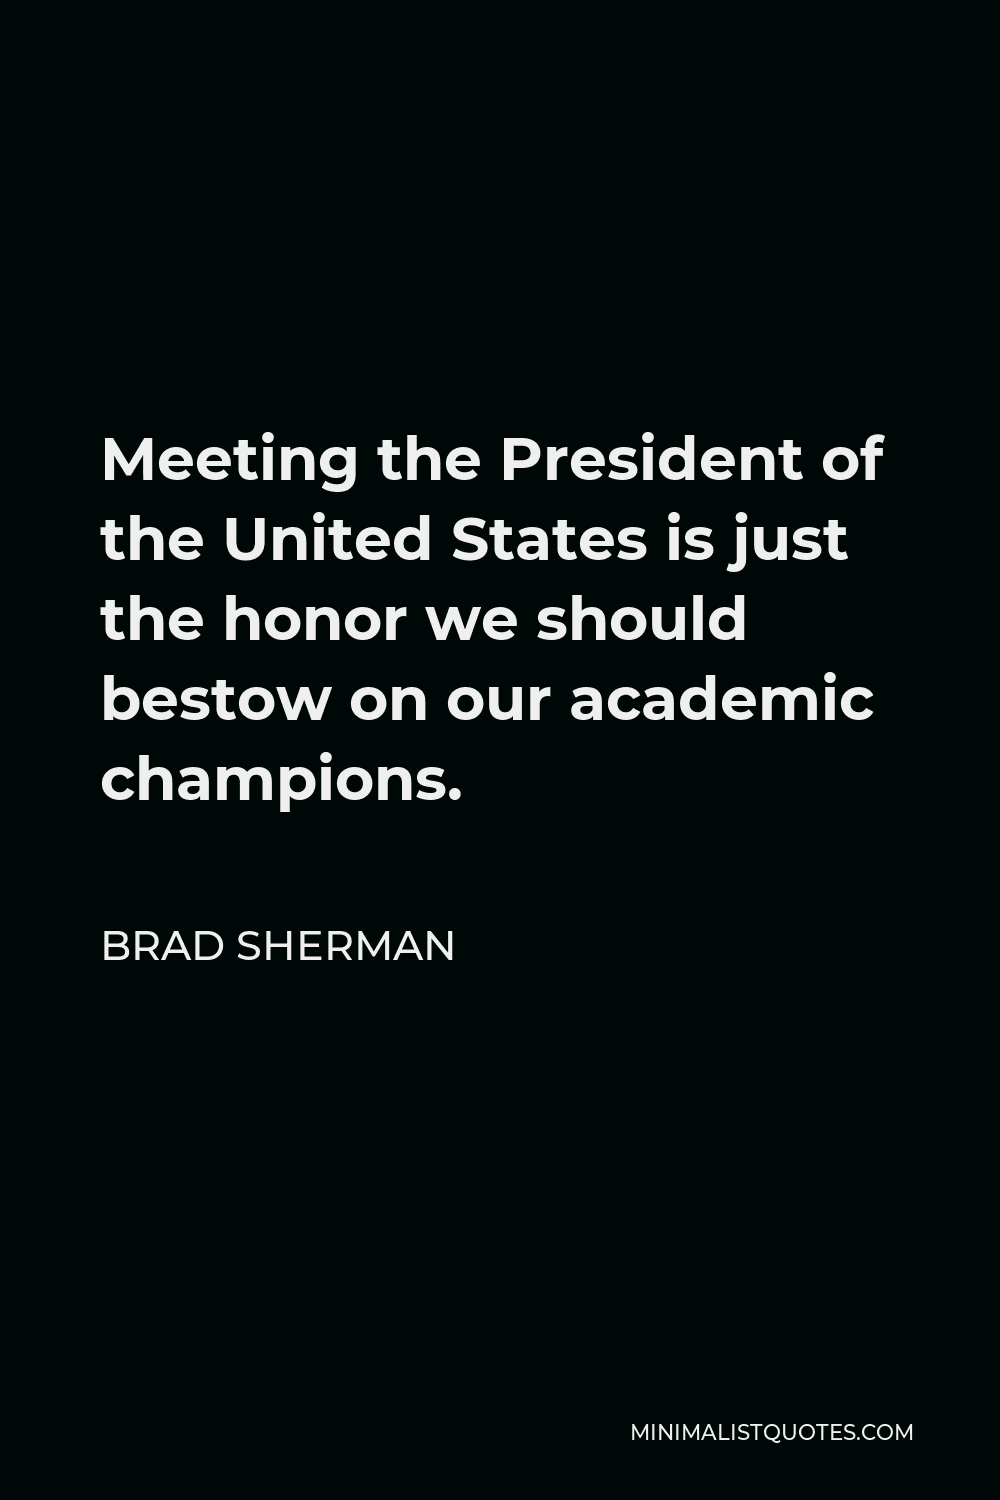 Brad Sherman Quote - Meeting the President of the United States is just the honor we should bestow on our academic champions.